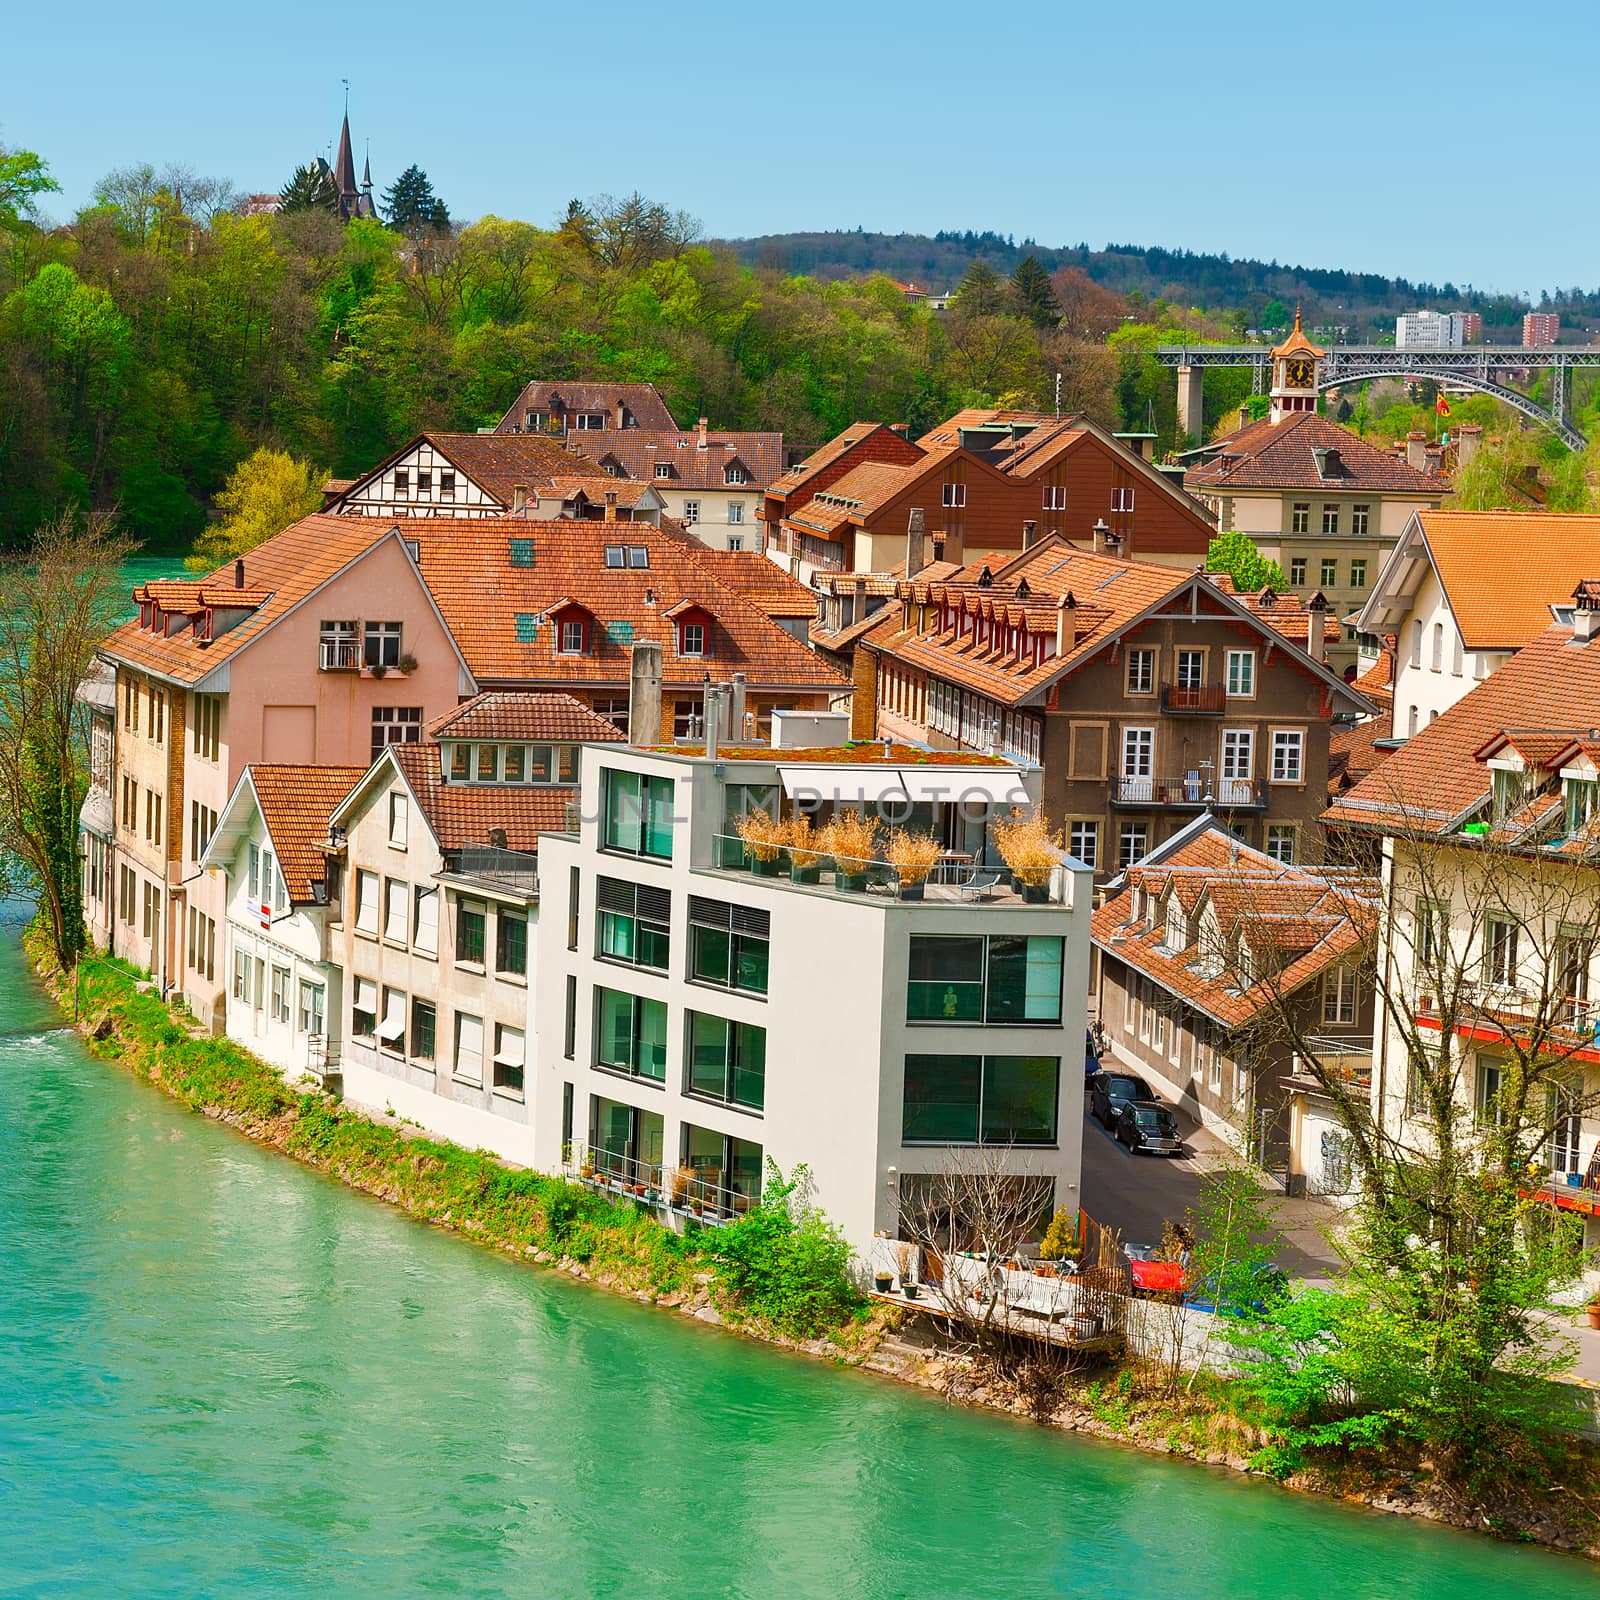 Aerial View to the Roofs of the City of Berne and River Aare in Switzerland